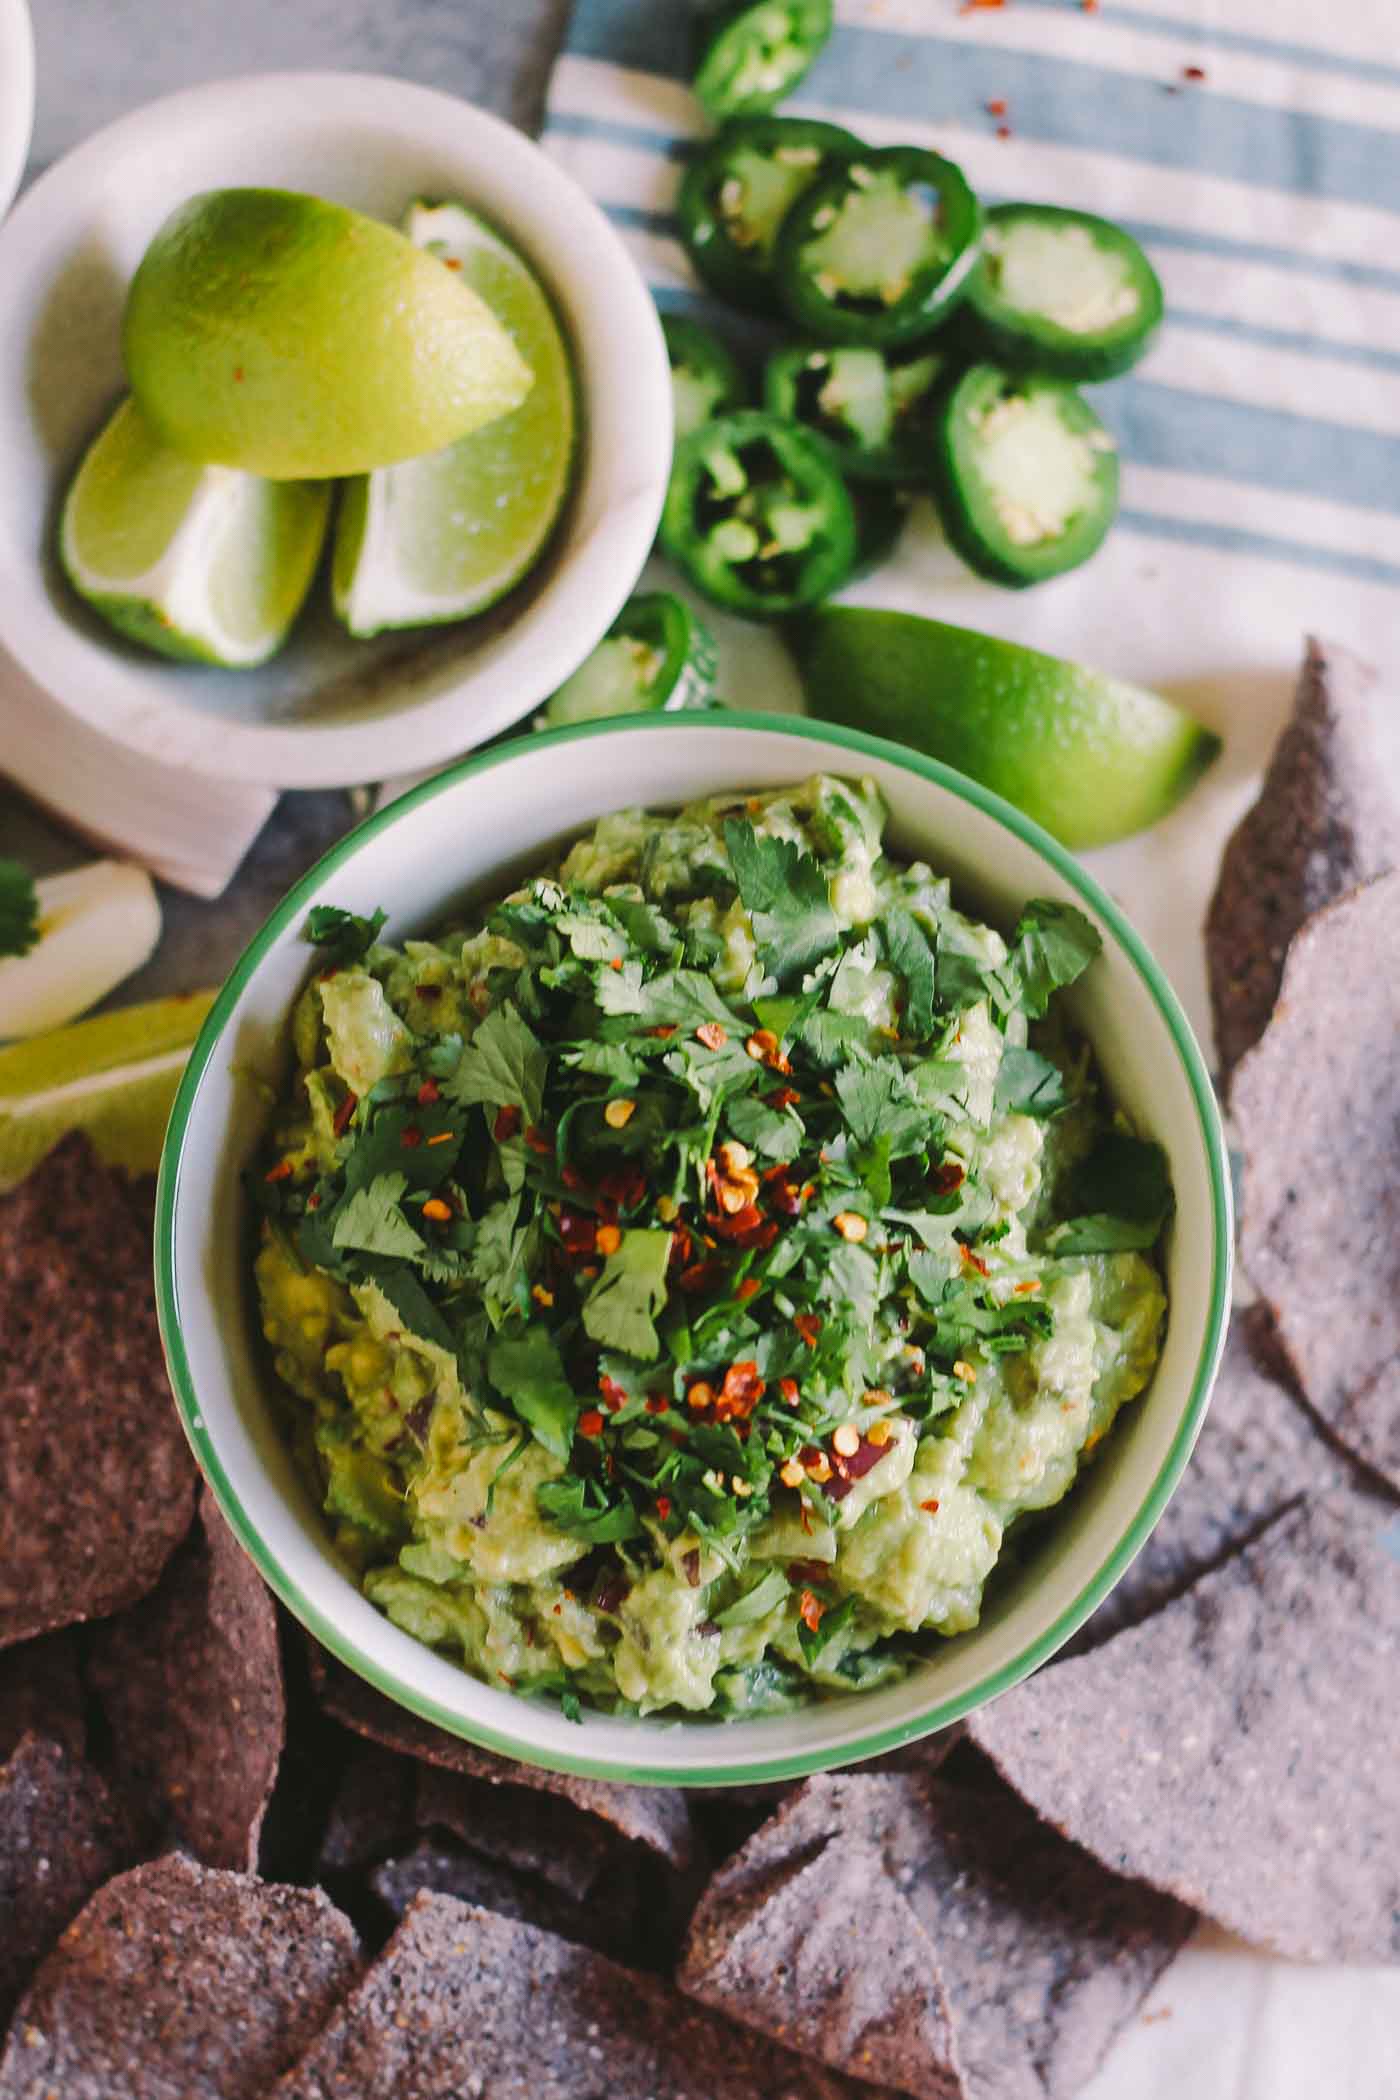 best guacamole ever + 50 recipes for perfect for summer parties! | summer food, summer parties, summer recipes, summer appetizers, summer desserts, summer drinks, easy entertaining, entertaining tips |